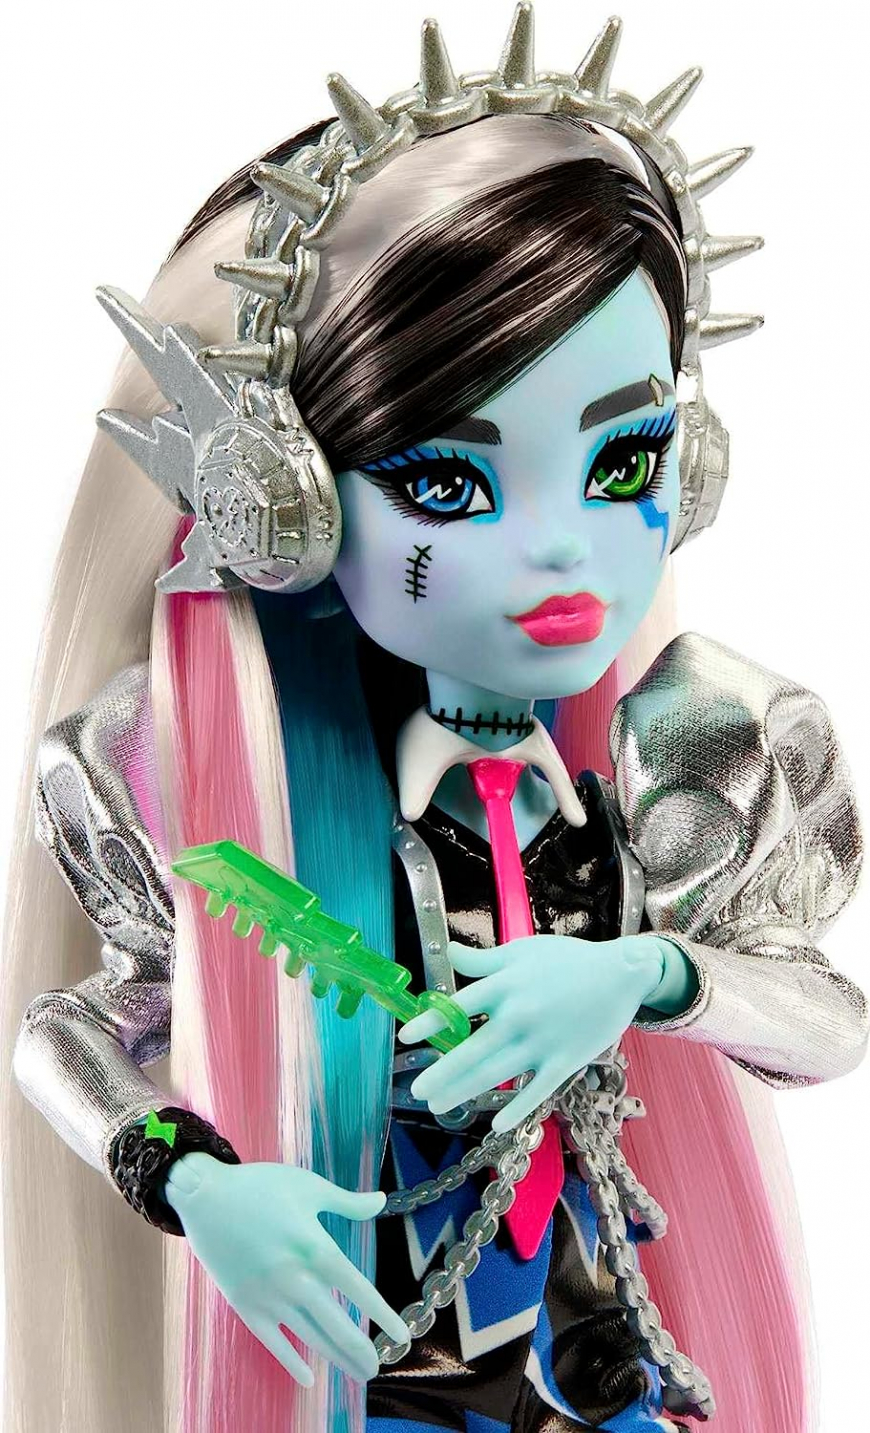 Monster High Amped Up Frankie Stein doll